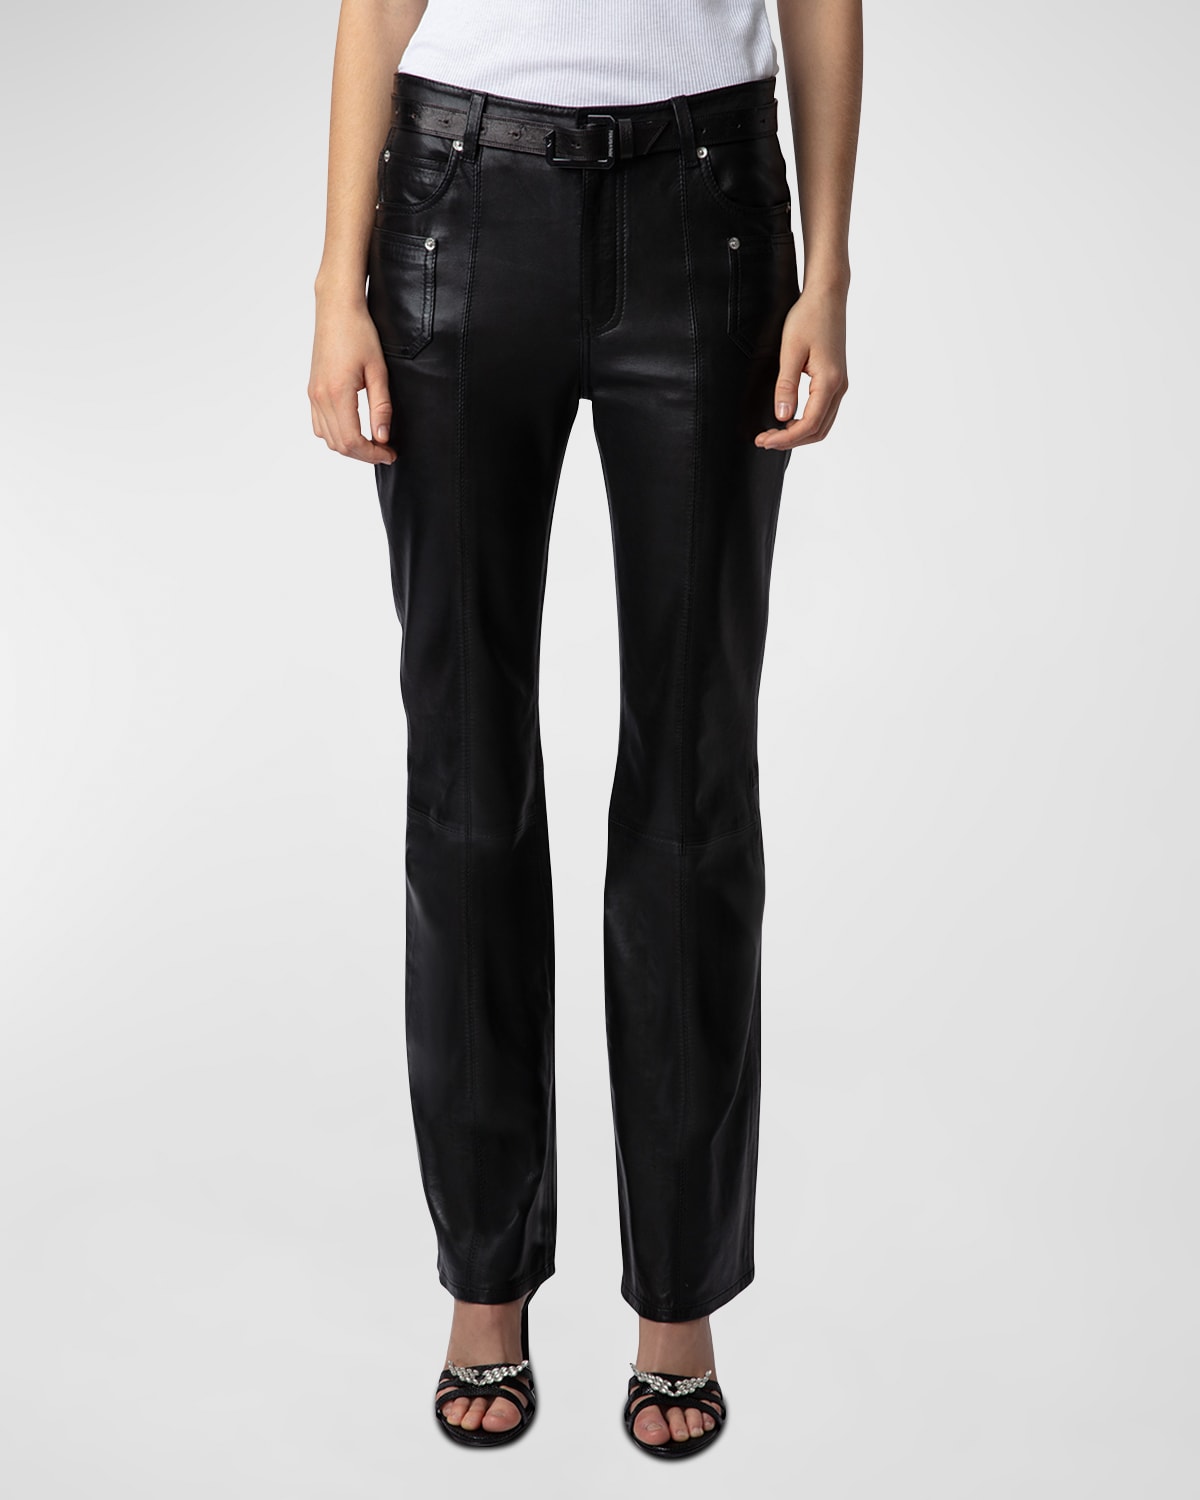 ZADIG & VOLTAIRE ELVIR MID-RISE LEATHER PANTS